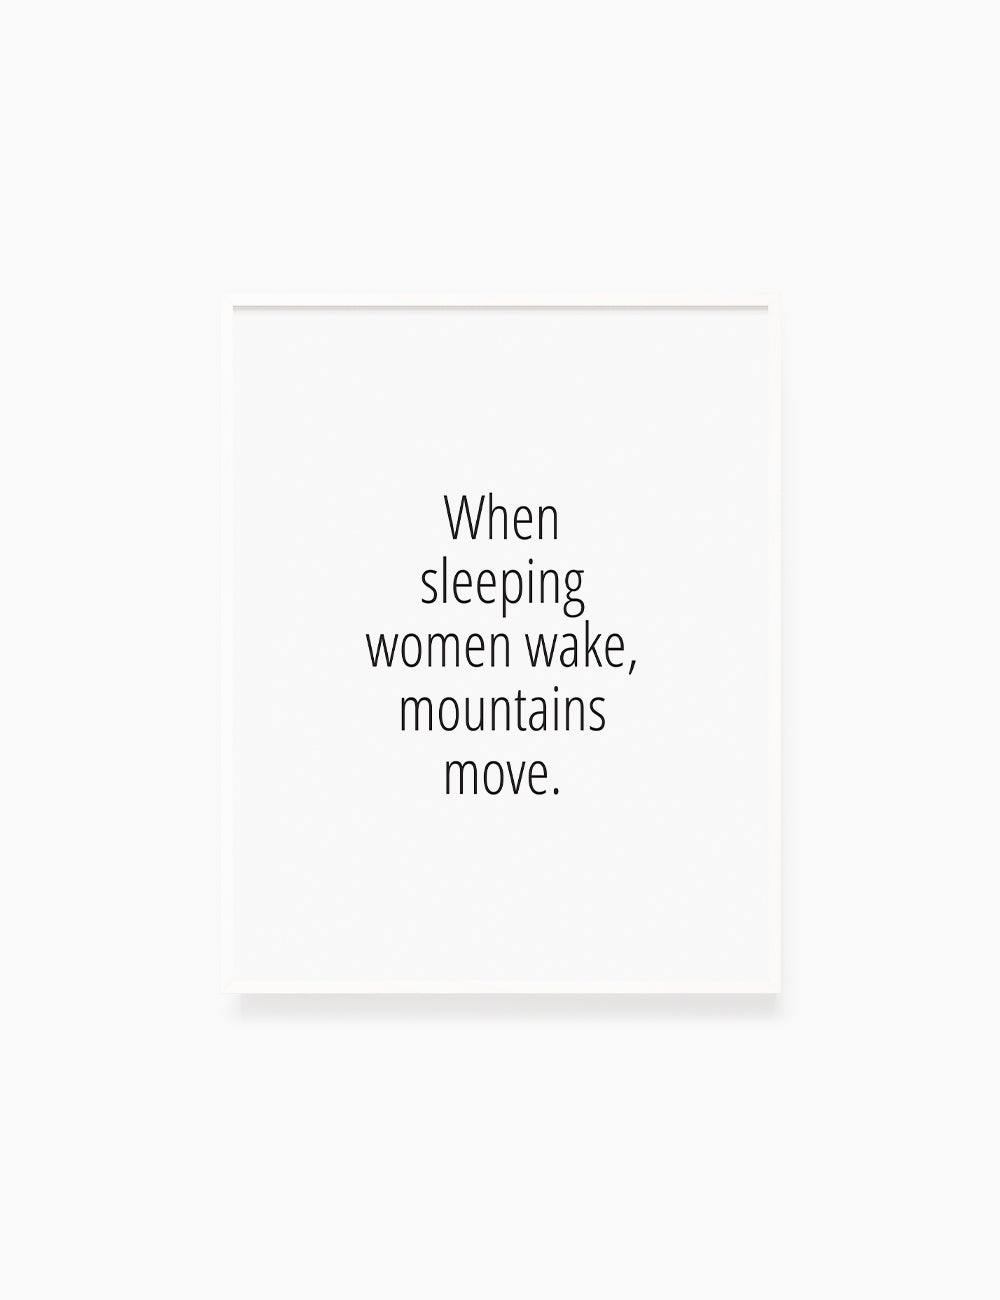 Printable Wall Art Quote: WHEN SLEEPING WOMEN WAKE, MOUNTAINS MOVE. Chinese Proverb. Printable Poster. WA034 - Paper Moon Art & Design